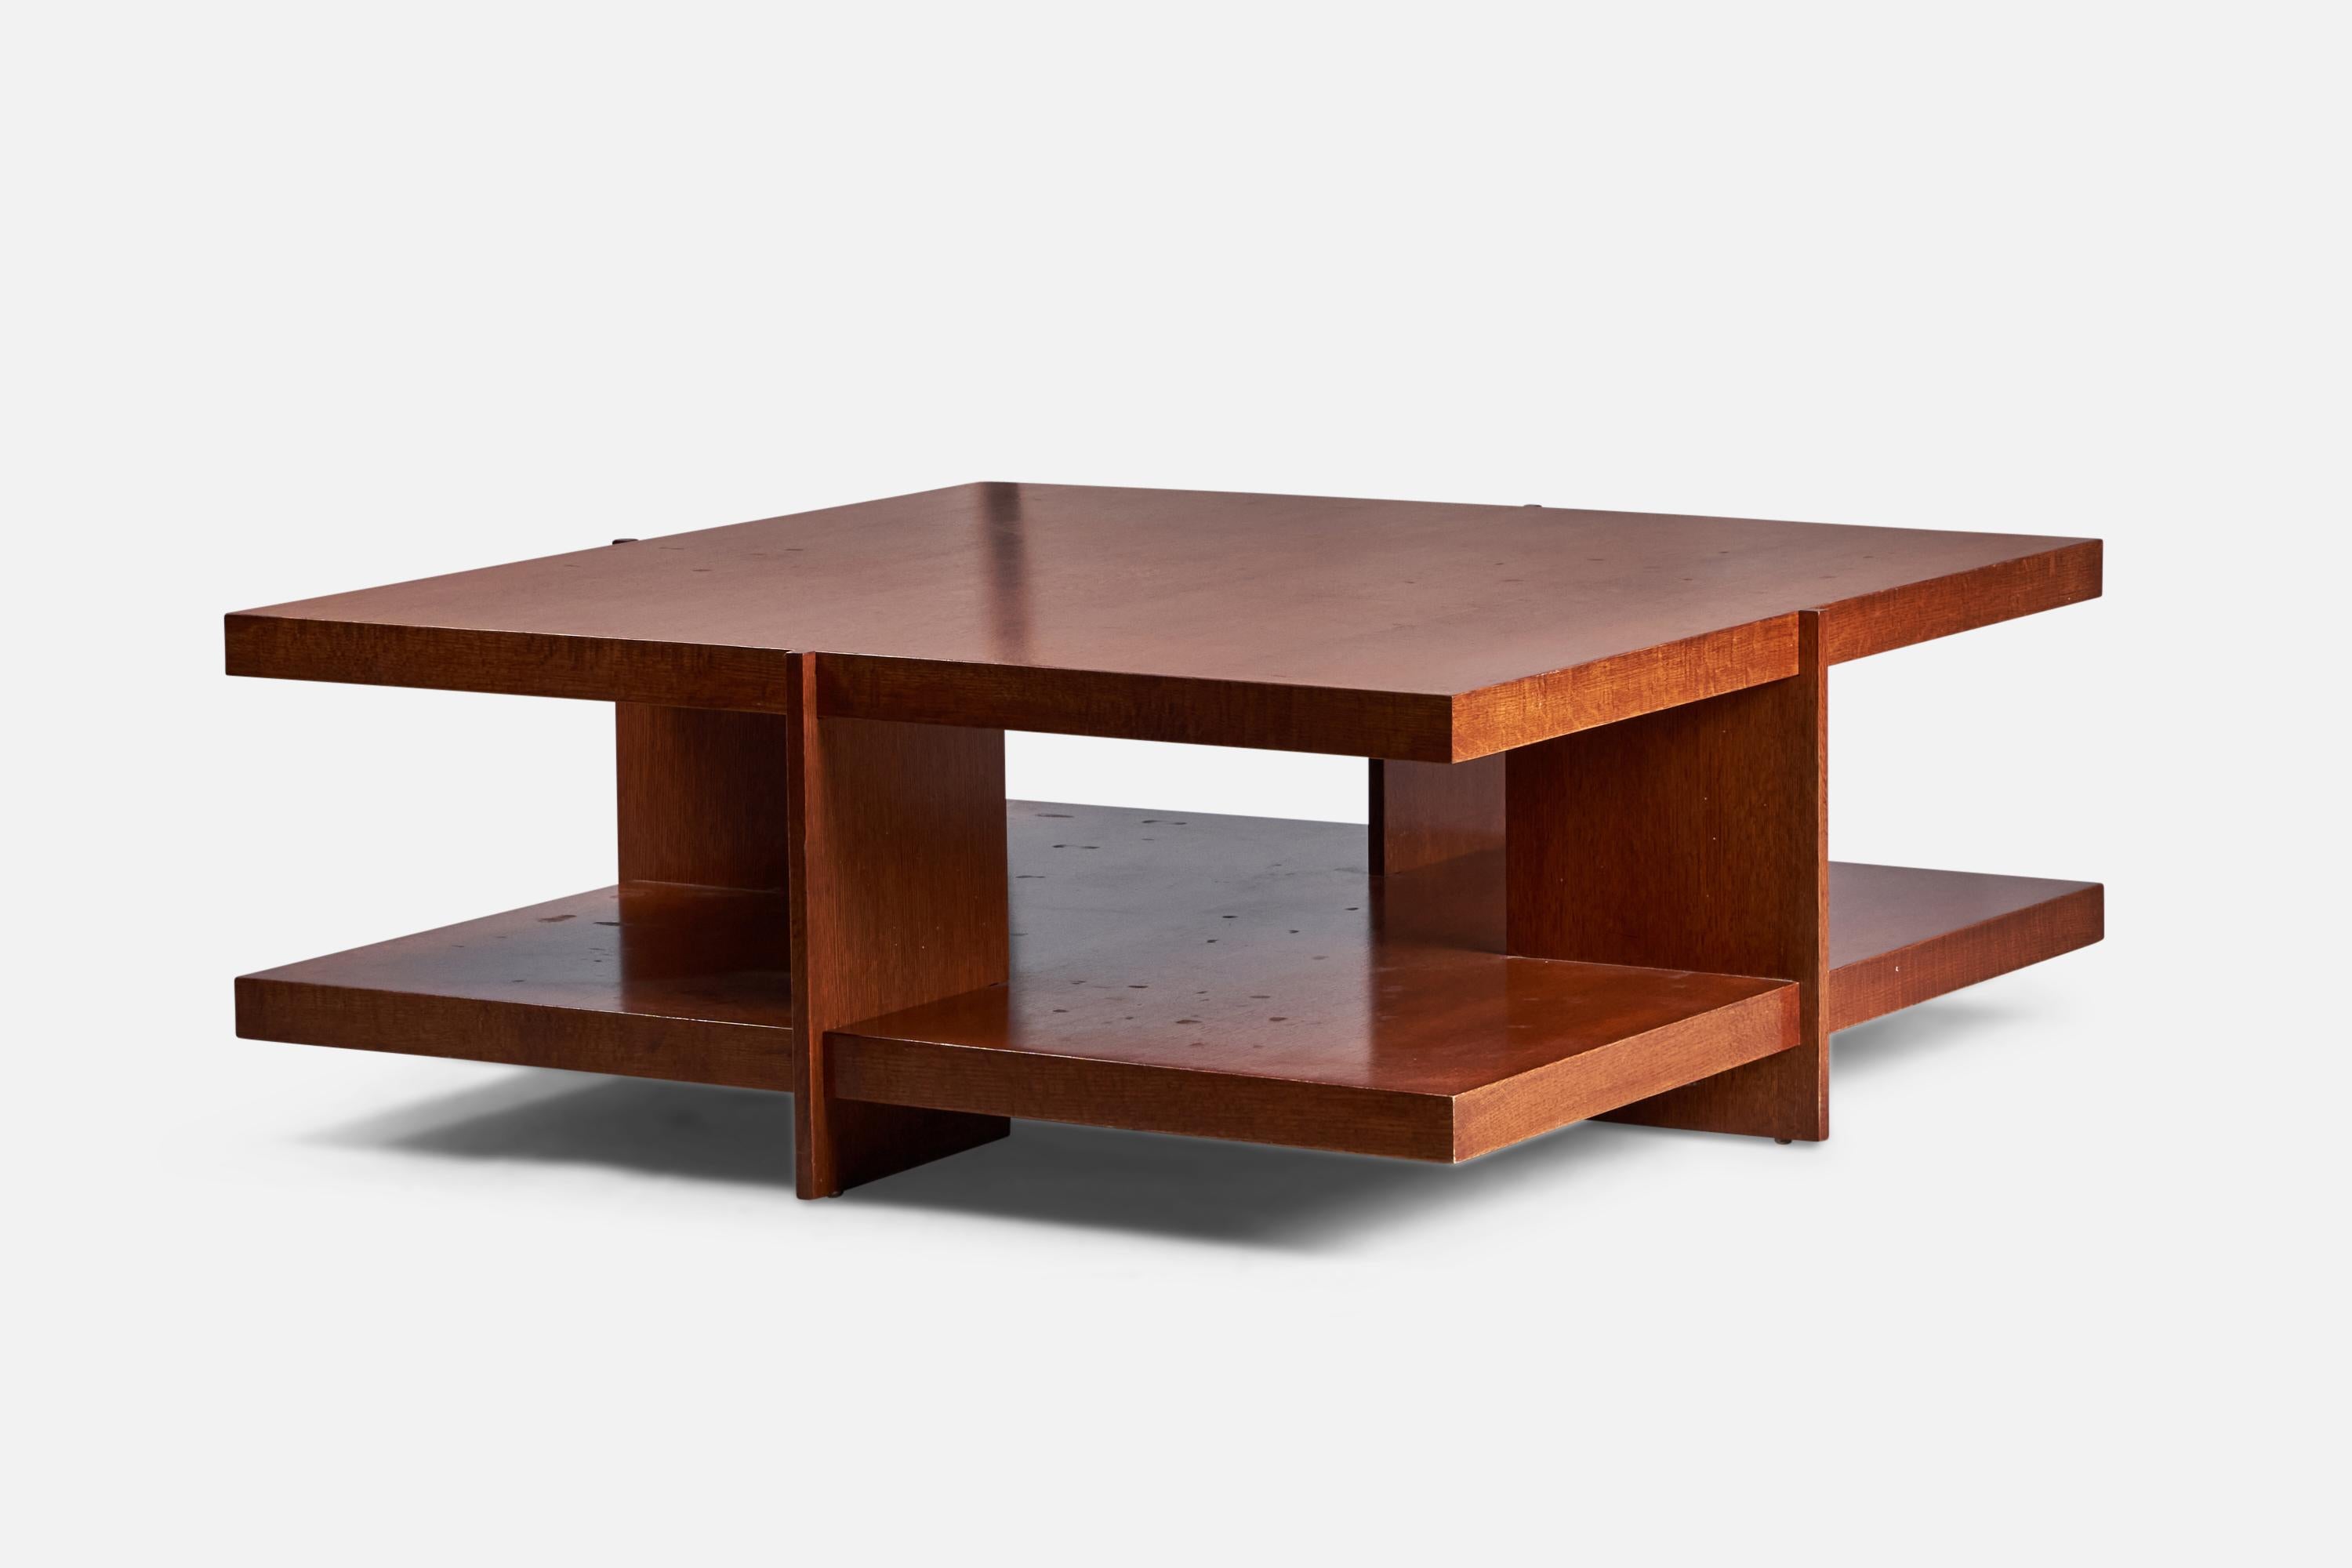 A sizeable wood and quarter sawn oak veneer coffee or cocktail table produced by Heinz & Co, USA, c. 1985. 

After a design by Frank Lloyd Wright from 1940.